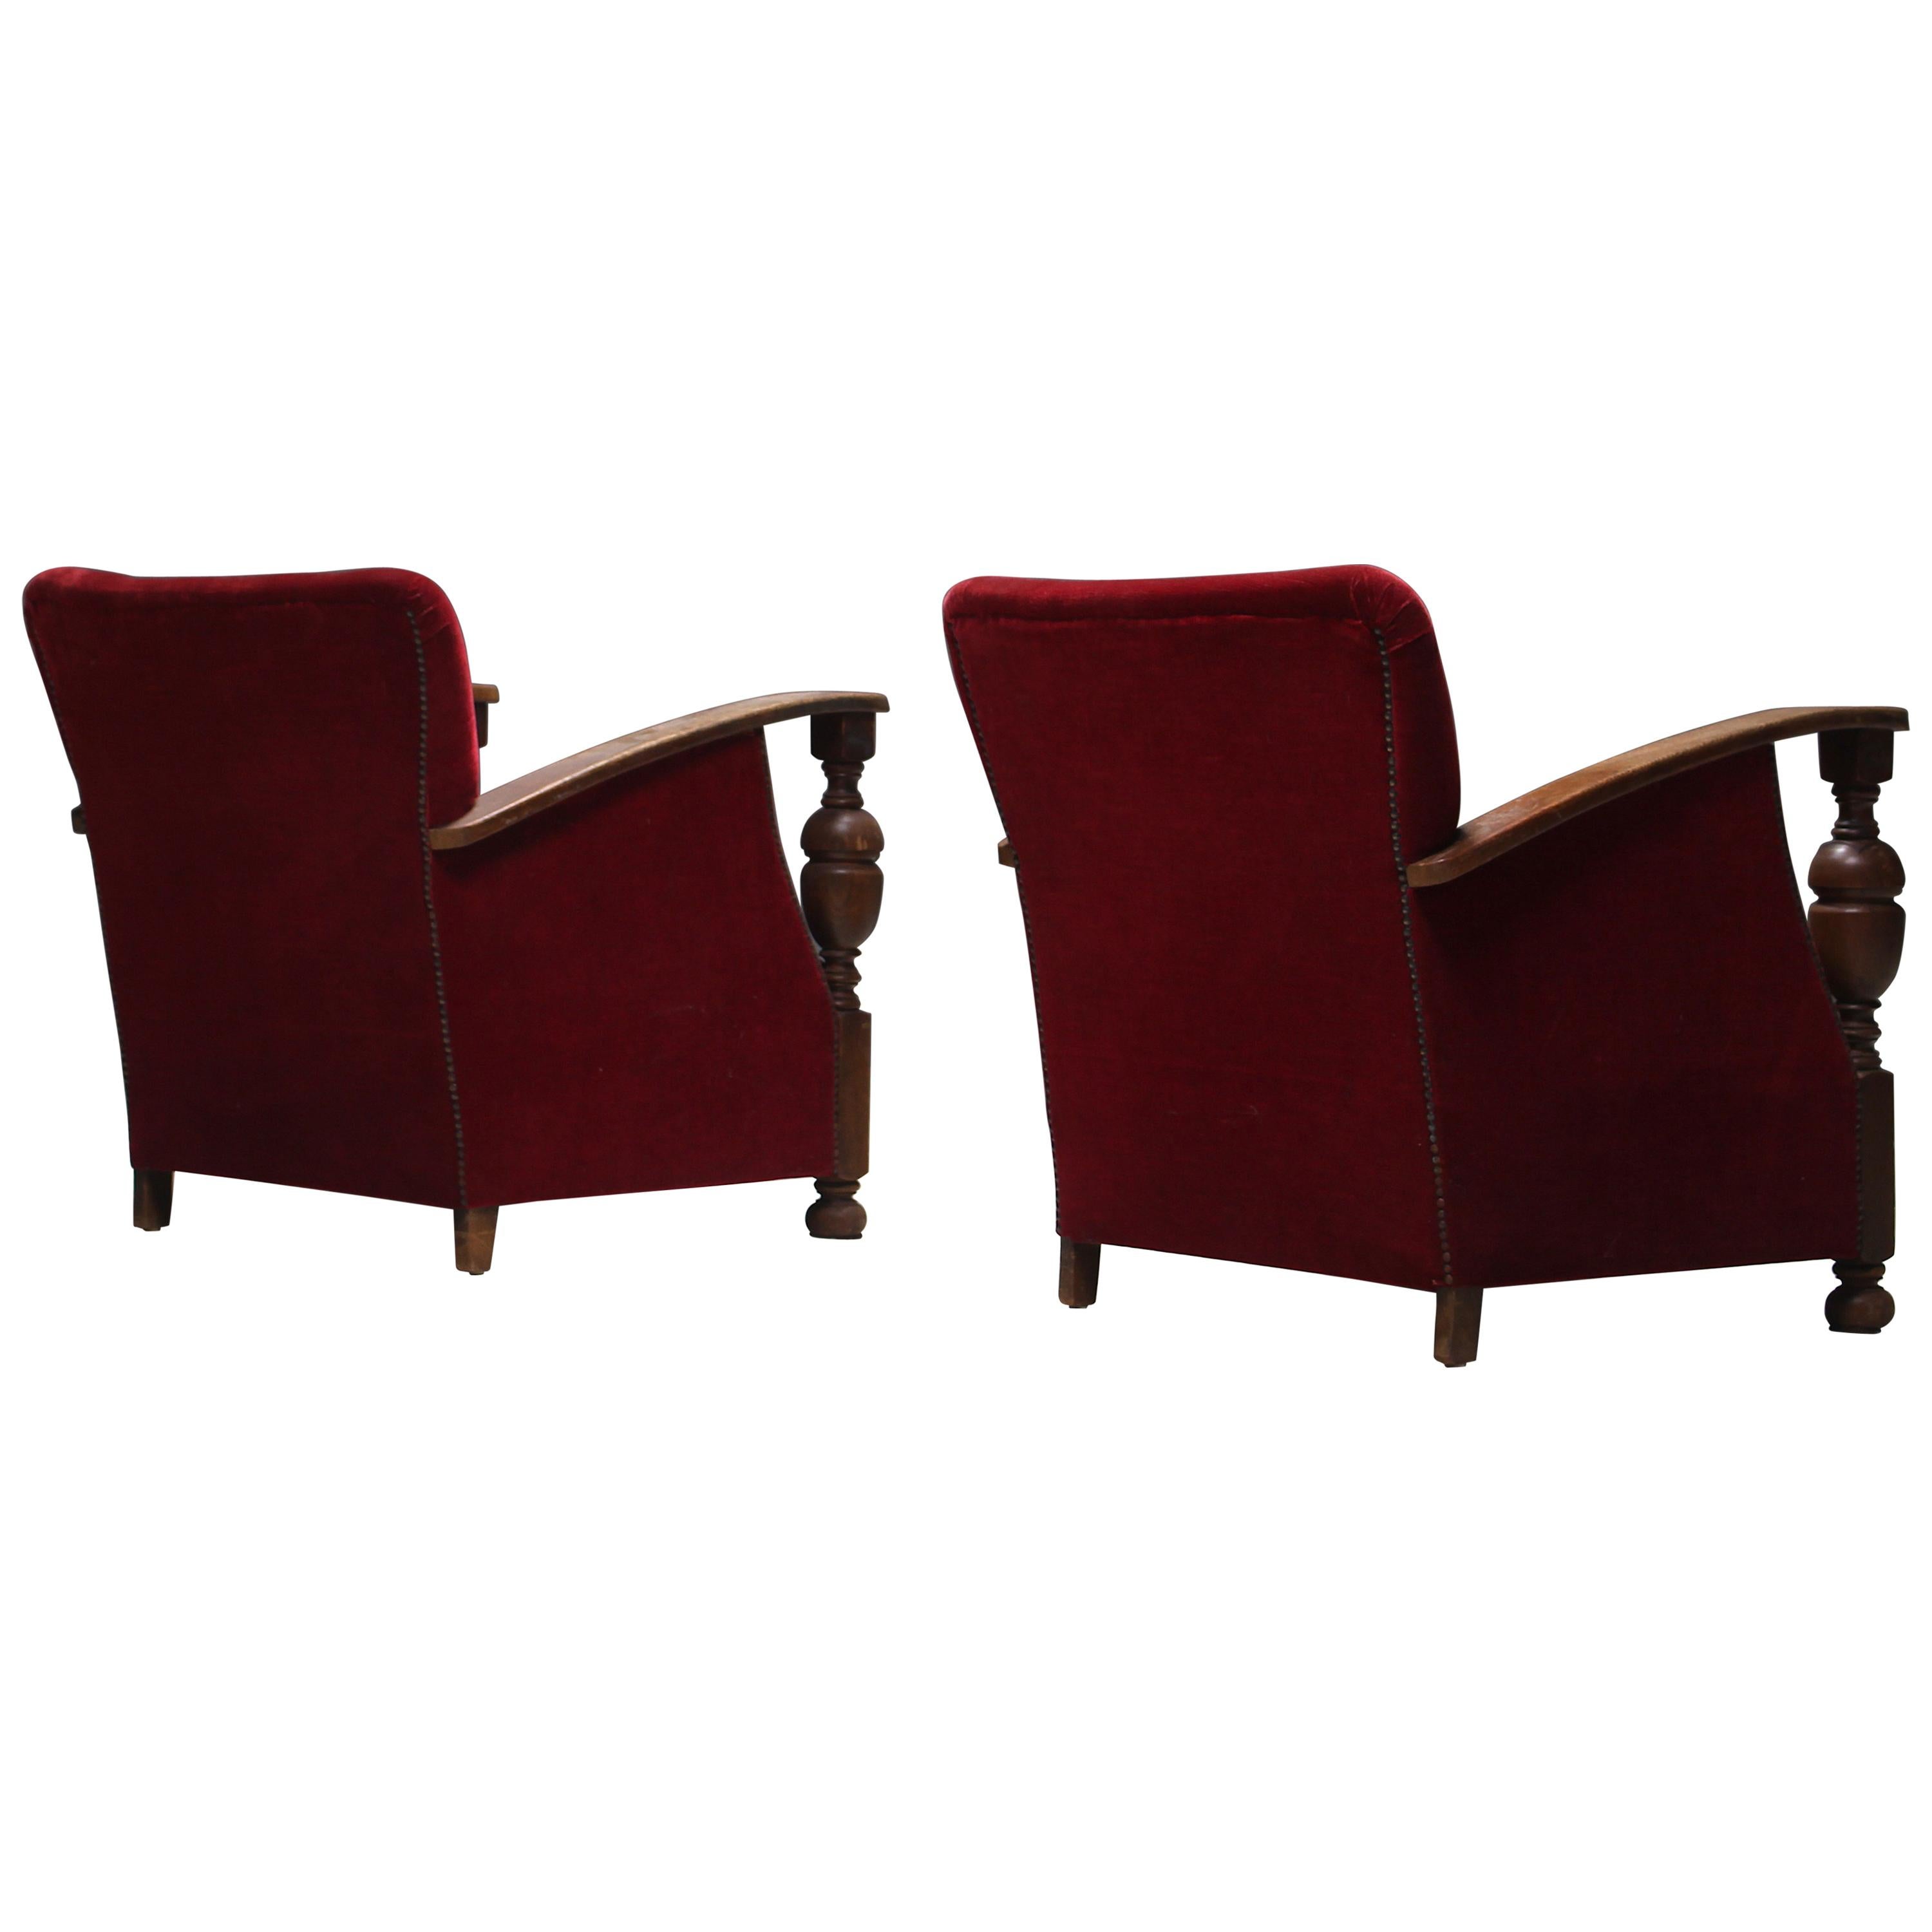 Dutch Art Deco Armchairs in Oak and Red Mohair, circa 1930s For Sale